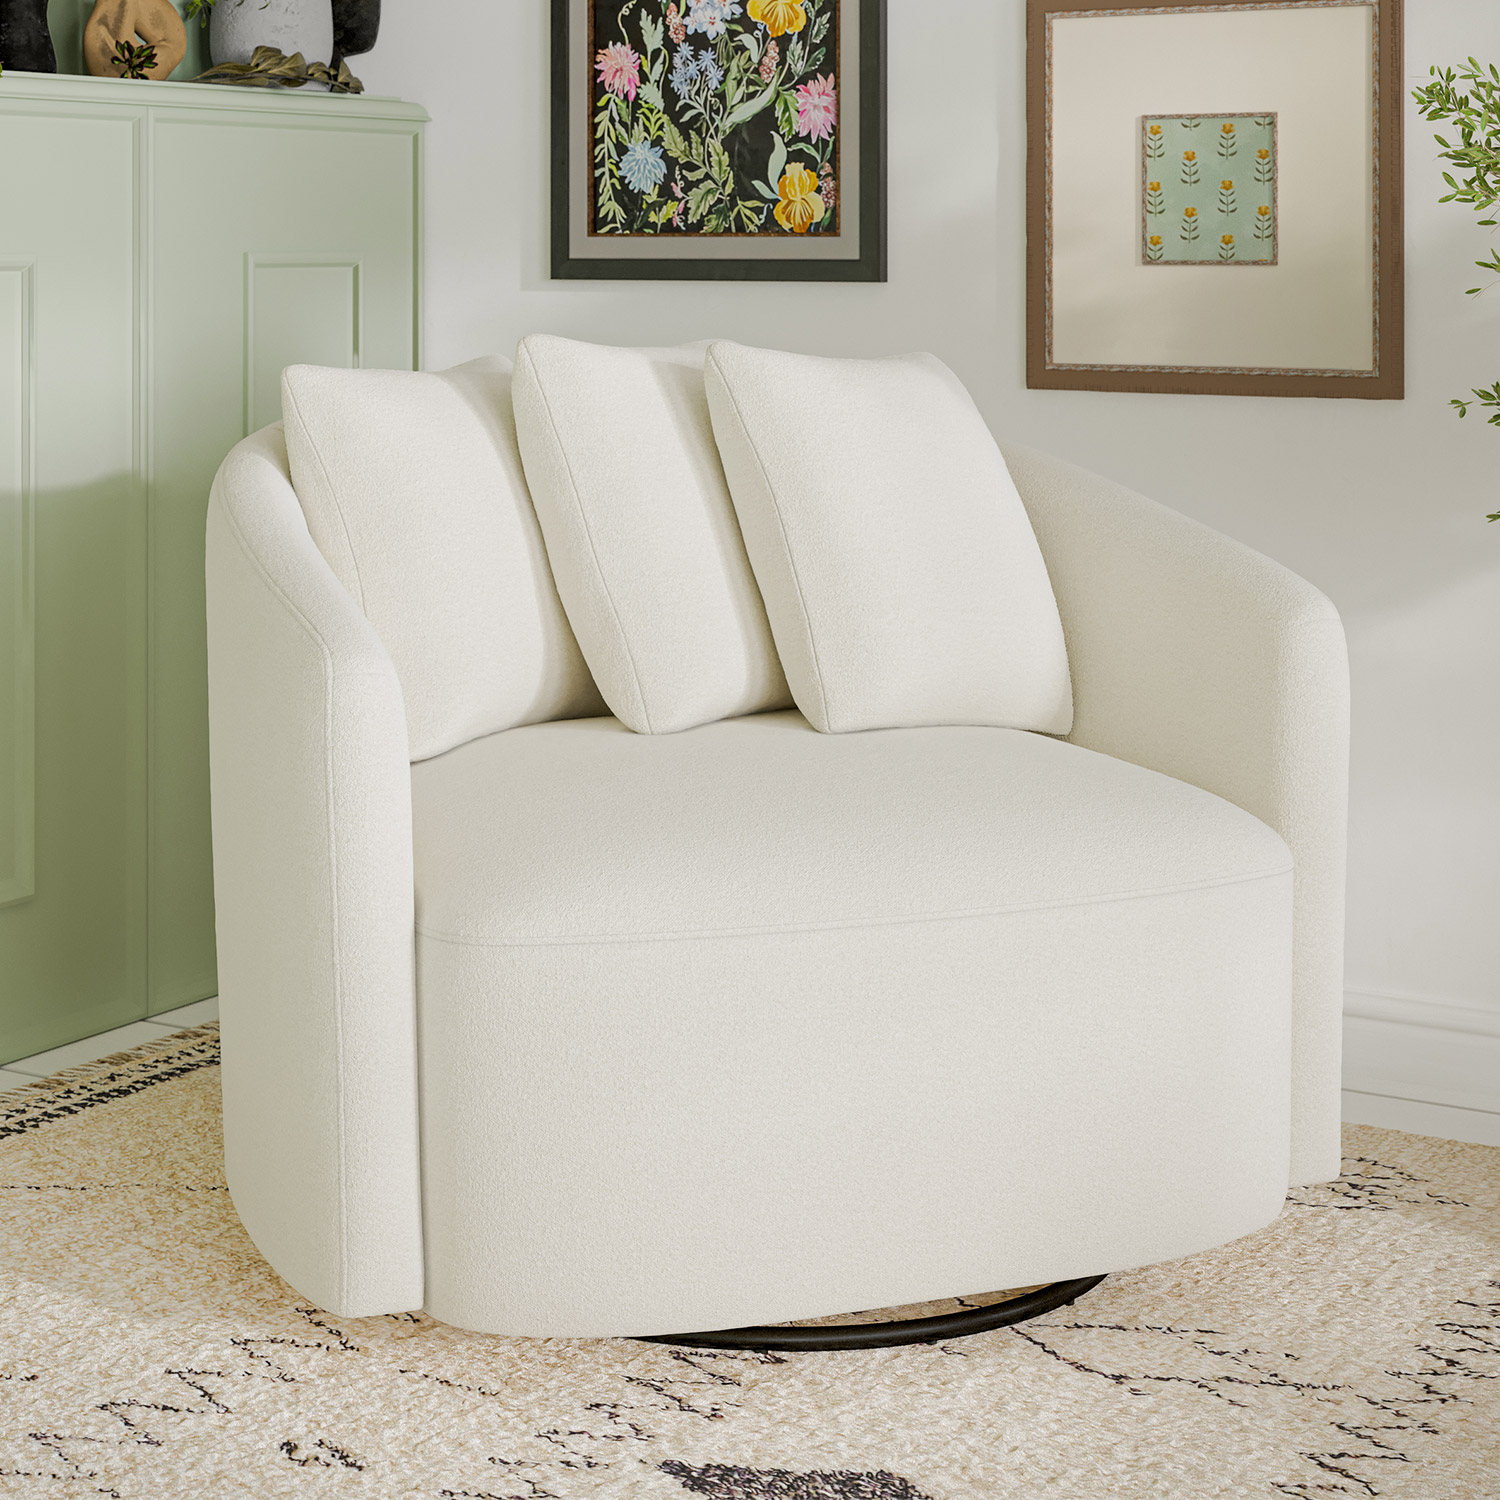 Beautiful Drew Chair by Drew Barrymore, Cream - image 1 of 11